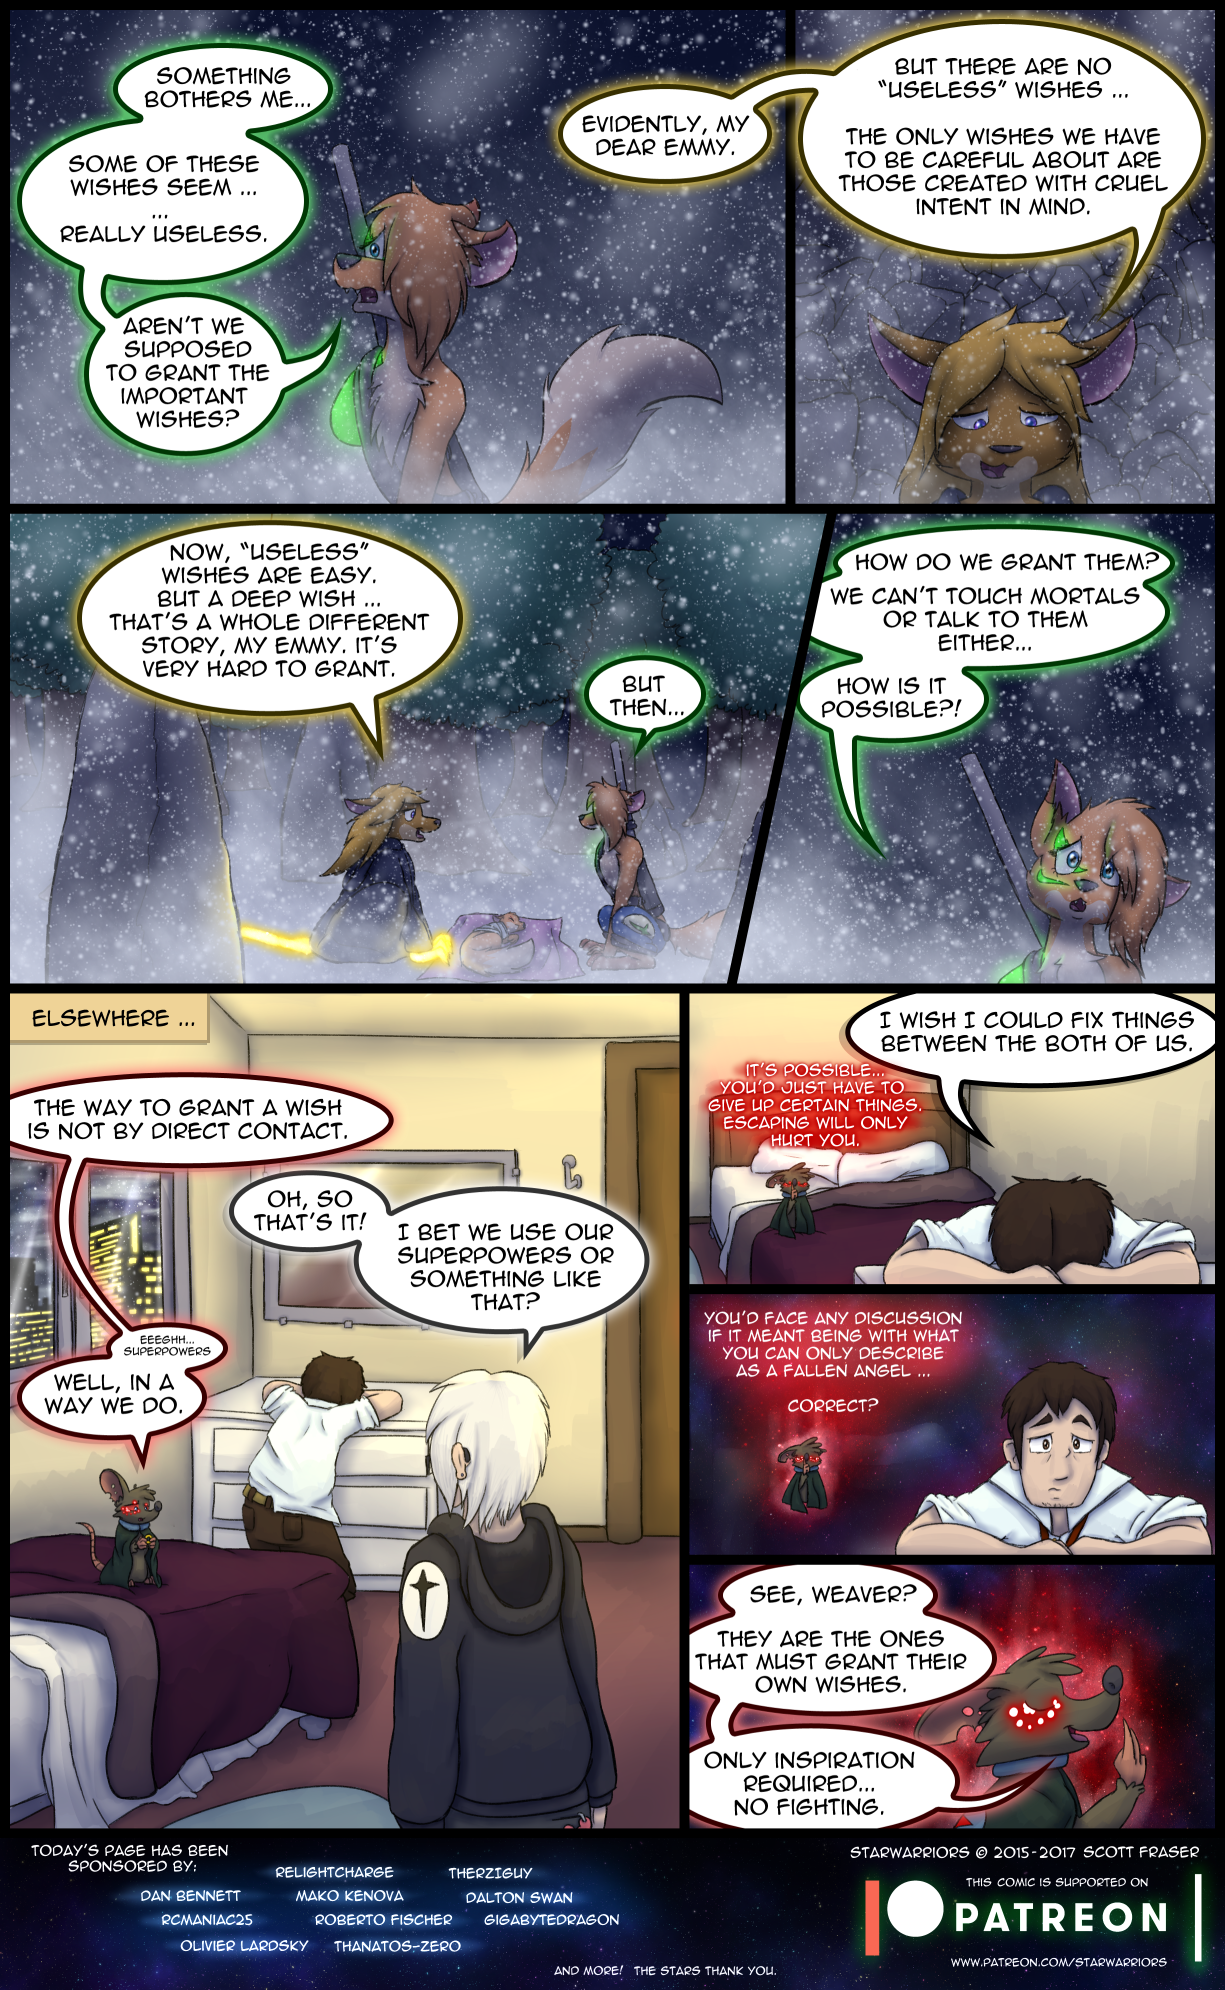 Ch3 Page 7 – Granting Wishes